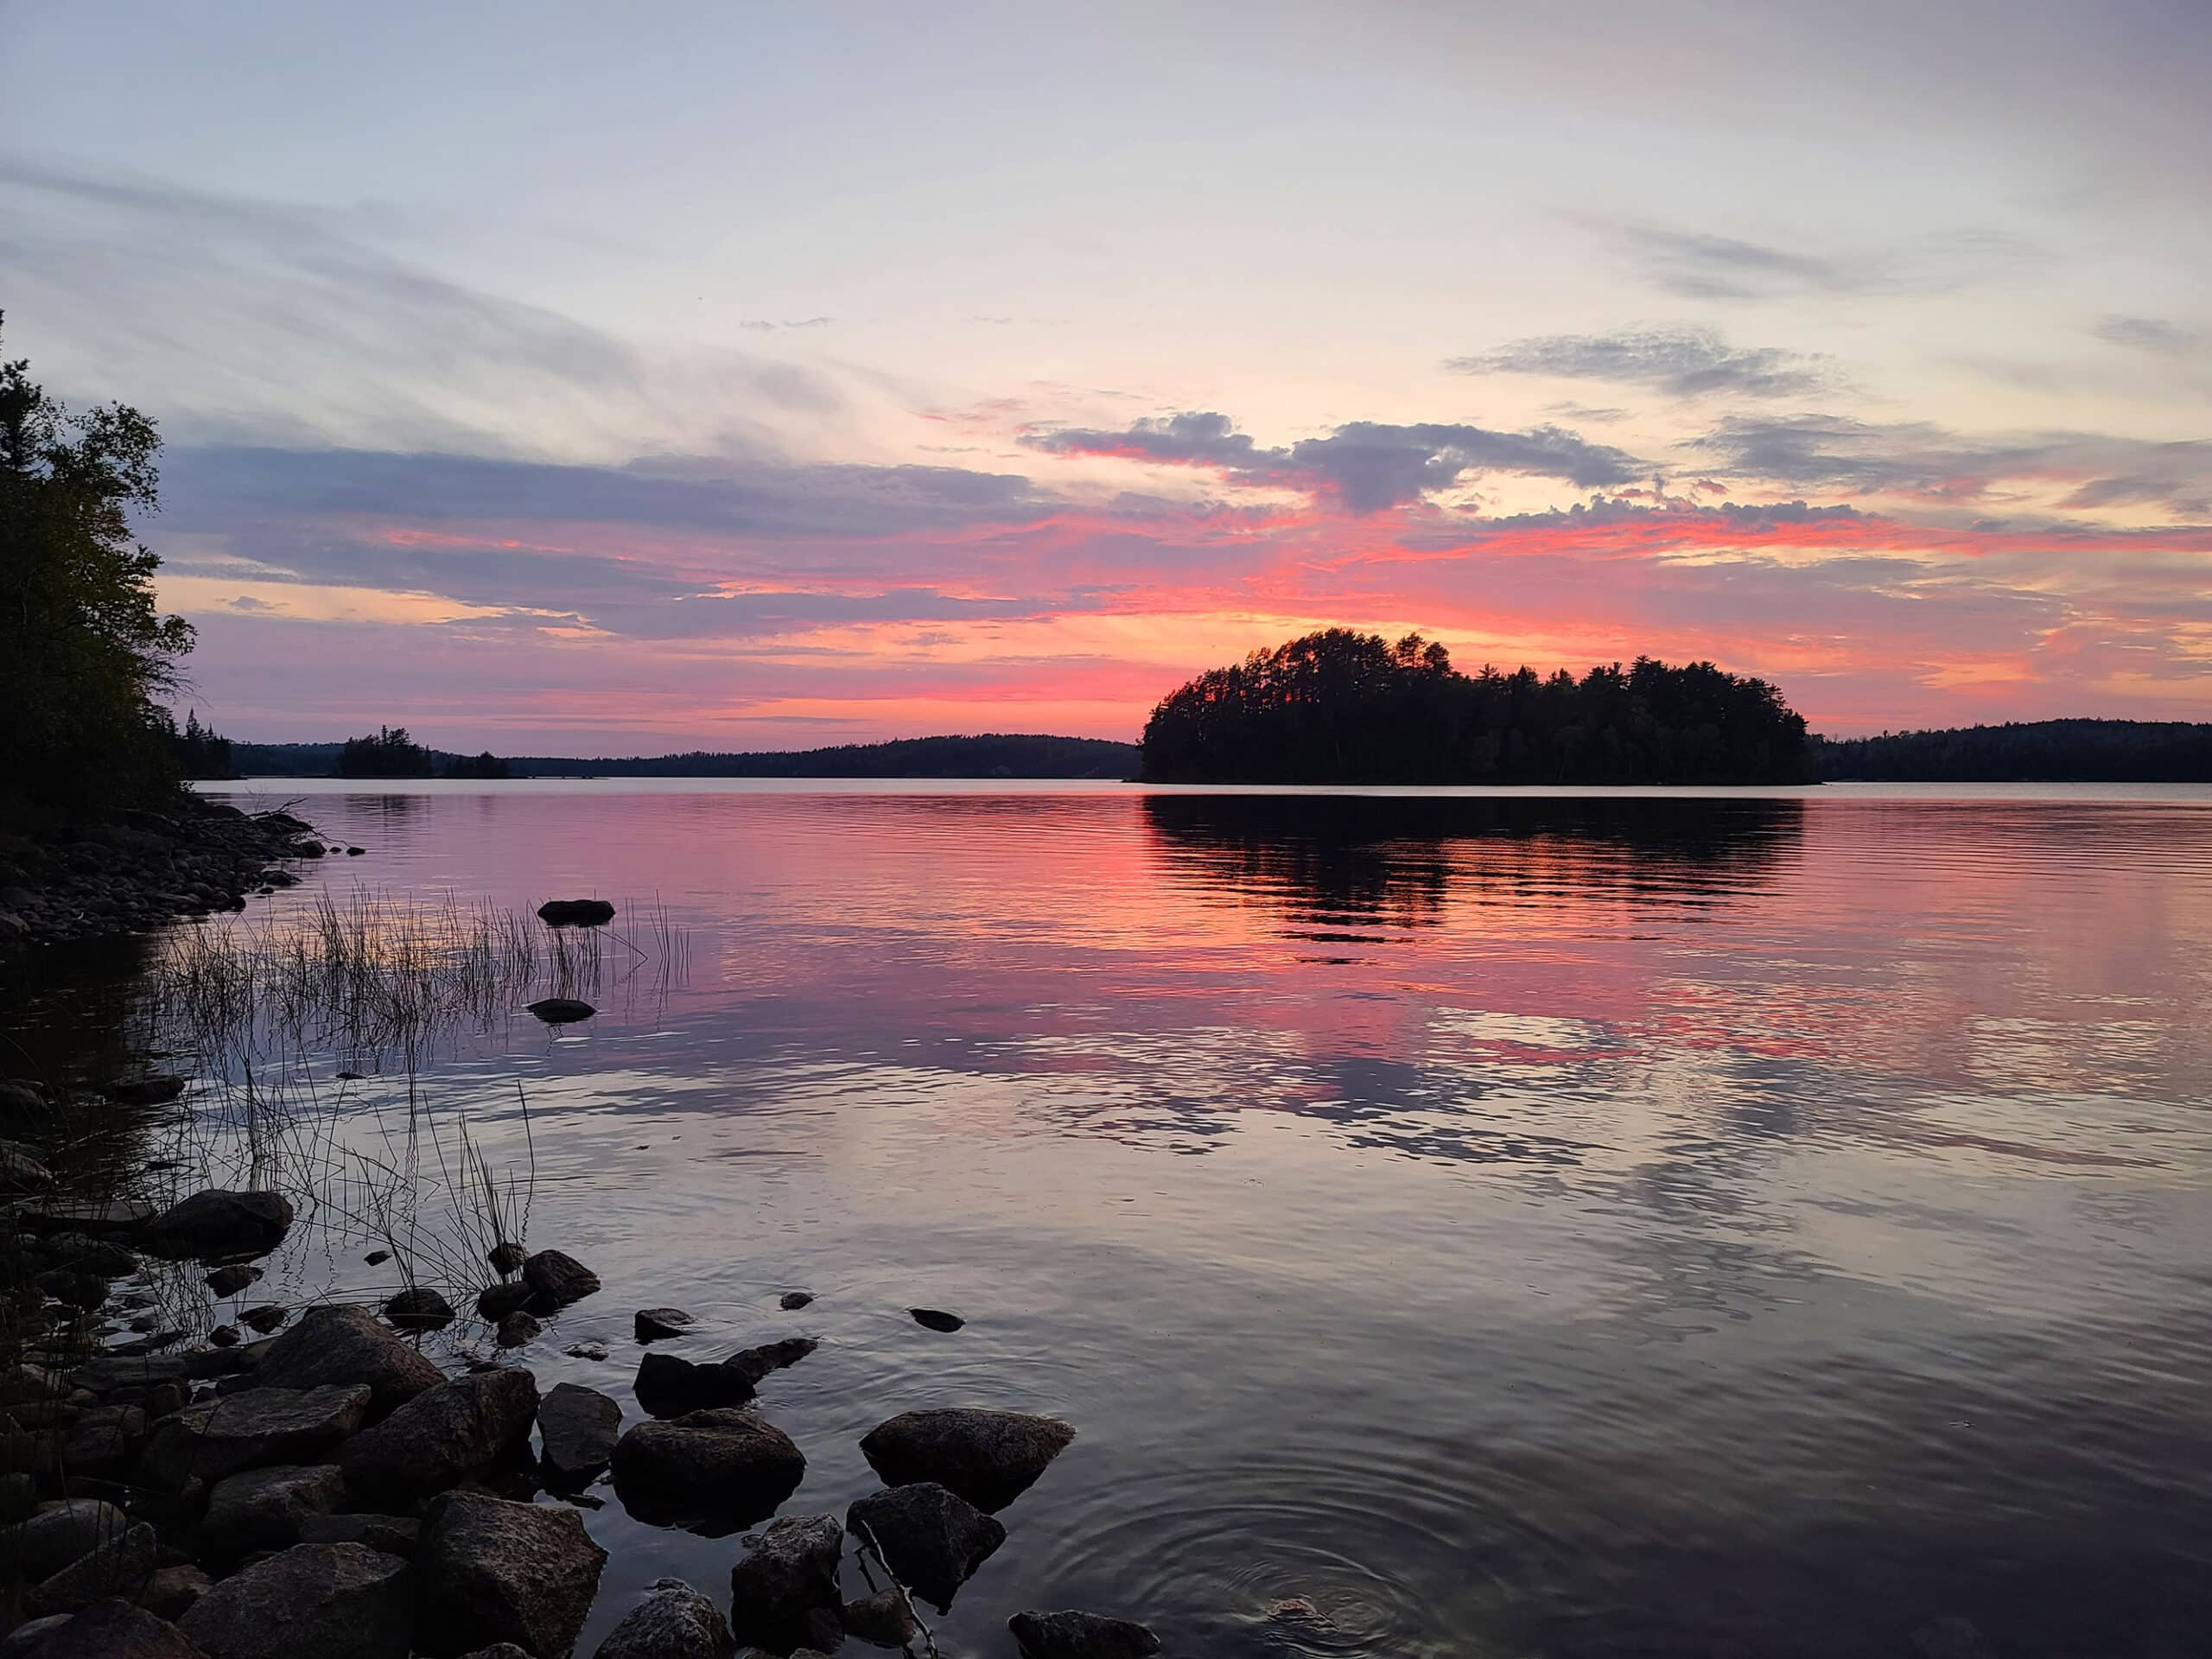 A pink and purple sunset over a lake in quetico provincial park, with an island in the background.